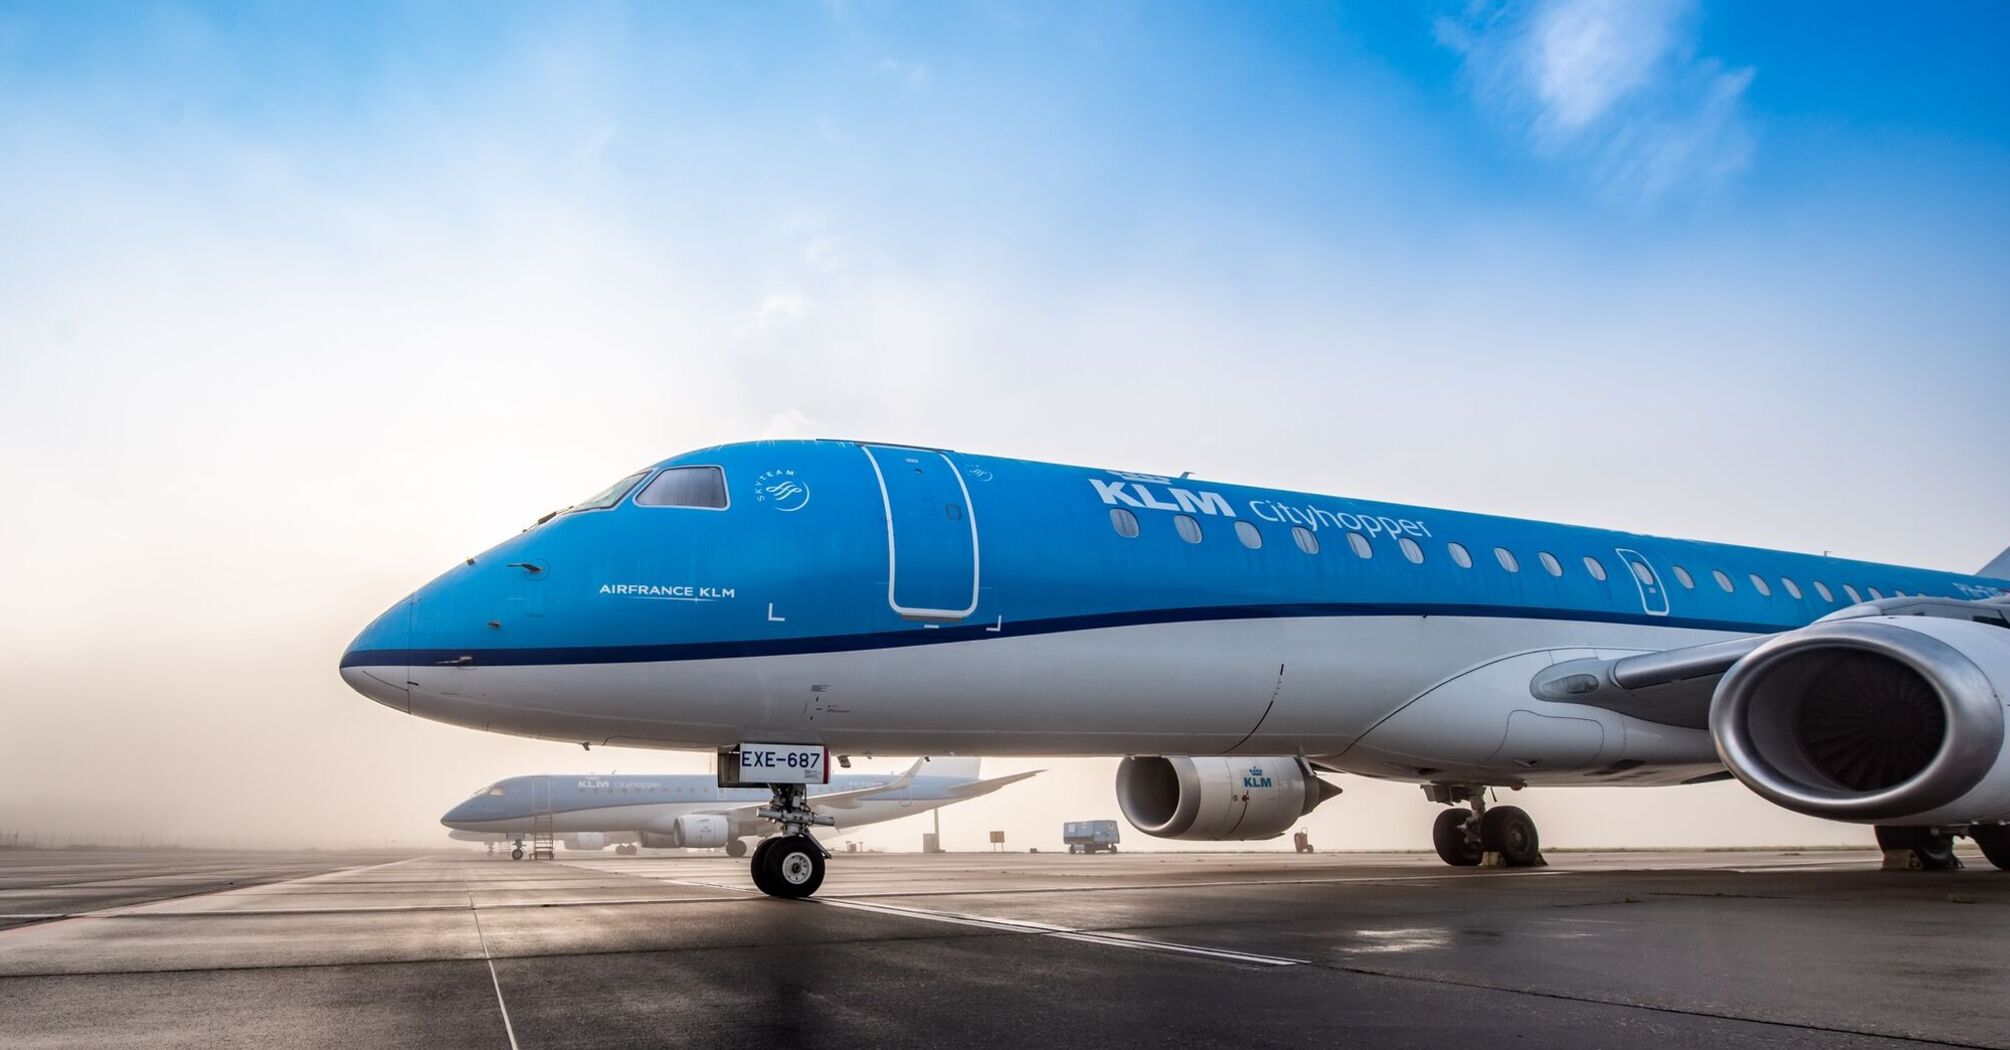 KLM is betting on environmental friendliness and comfort with its new Airbus A321neo aircraft: when and where the first flights will take off